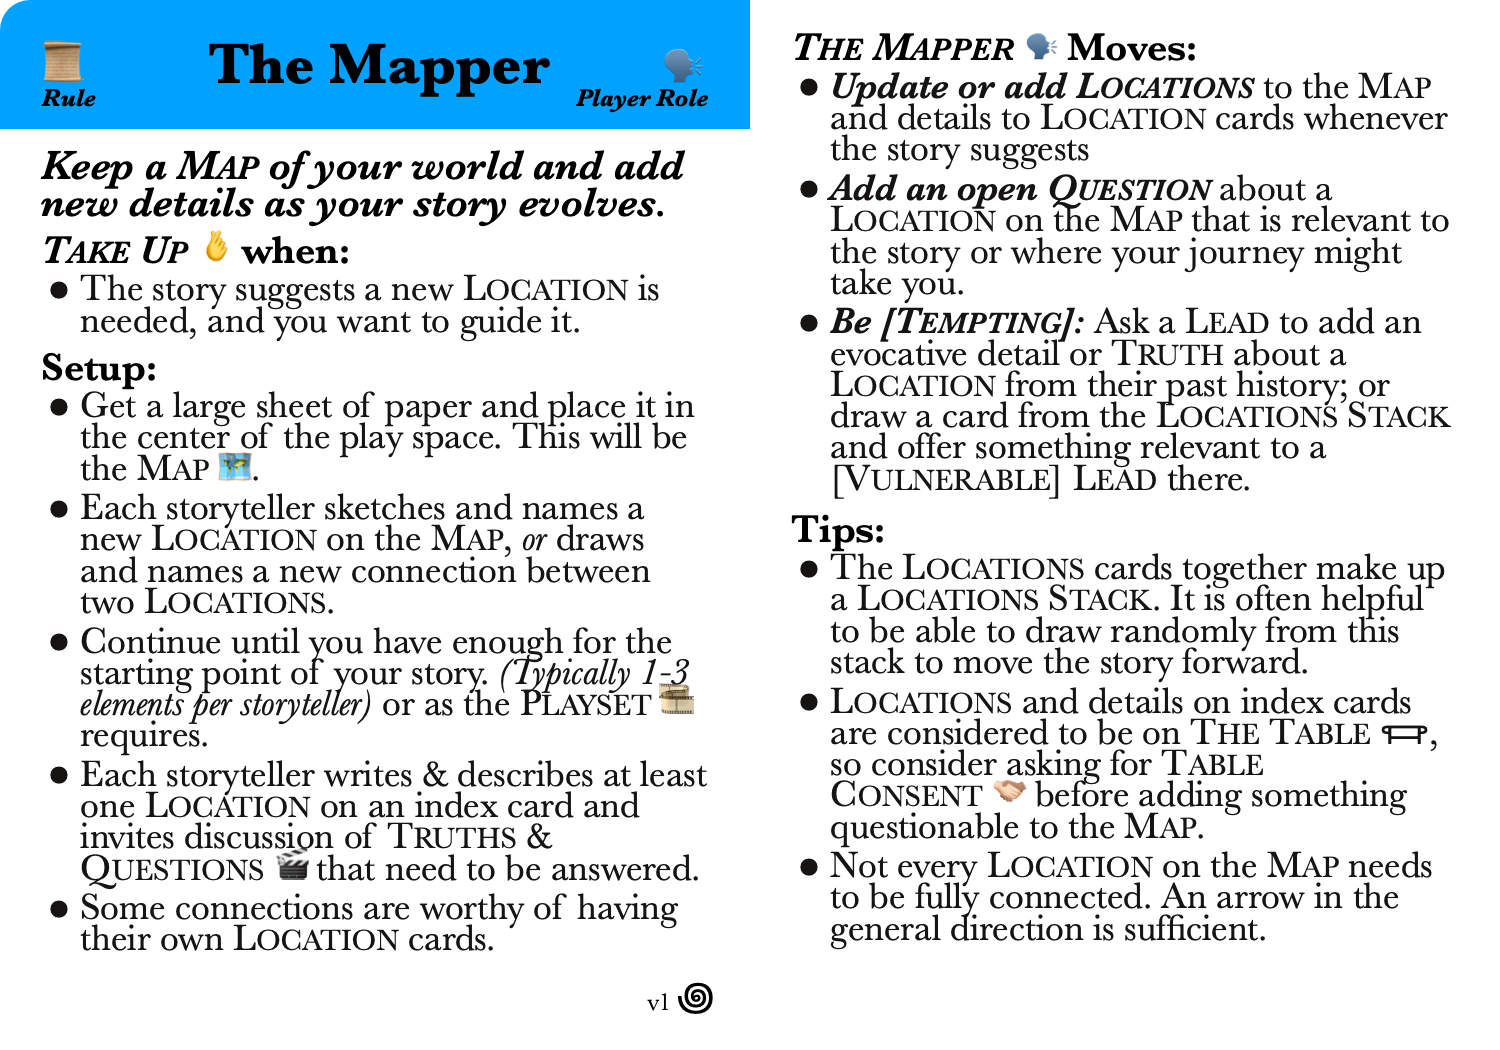 Player Role 🗣 card: The Mapper